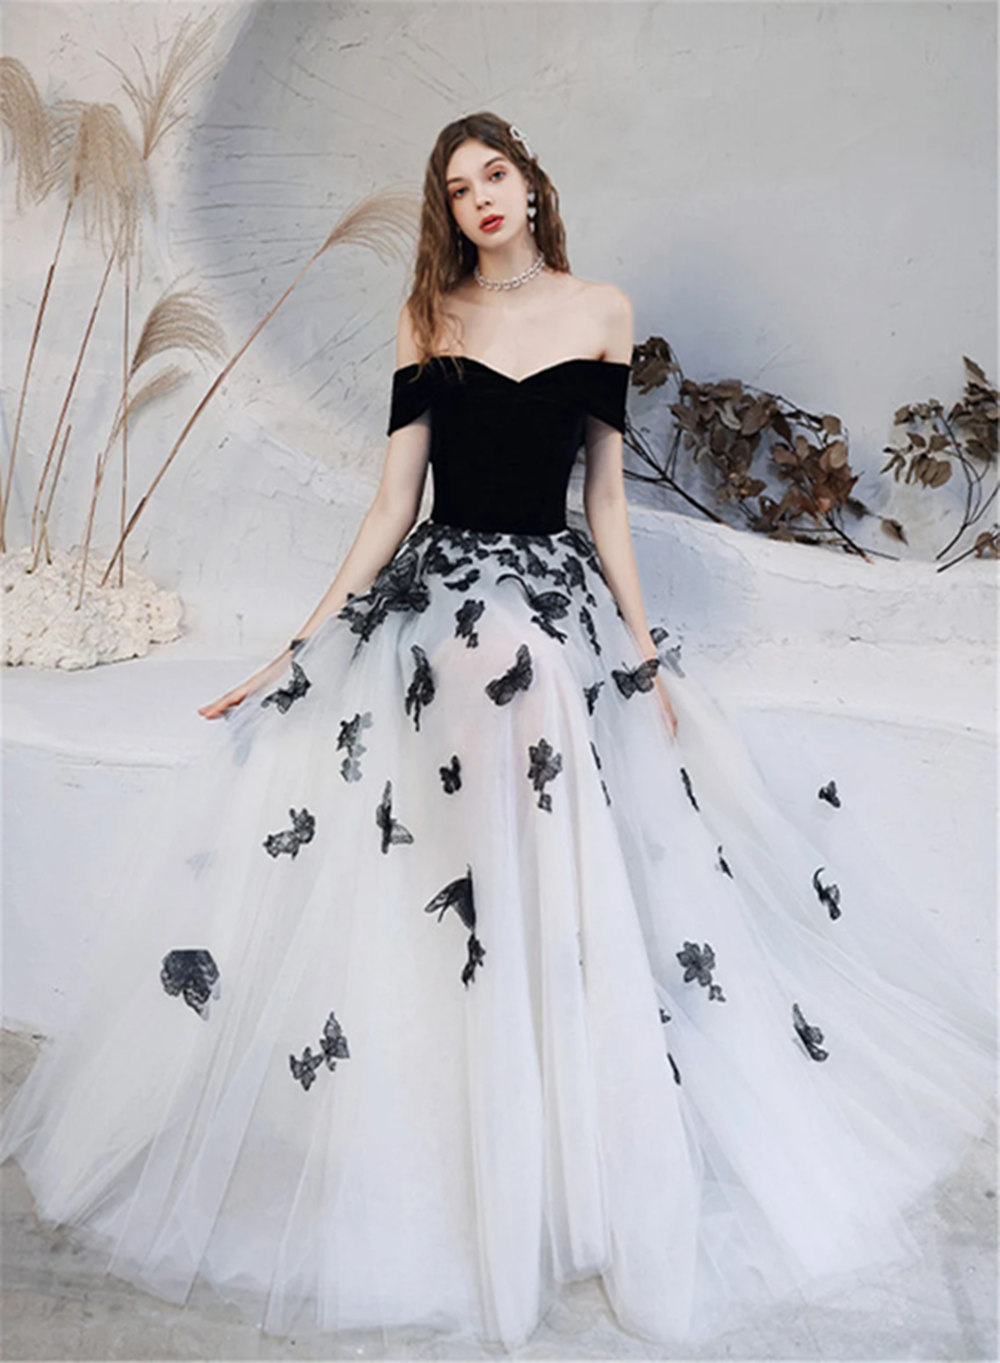 Black and White Prom Dress Sweetheart Party Dress, A-Line Graduation Dress Black Quinceanera Dress